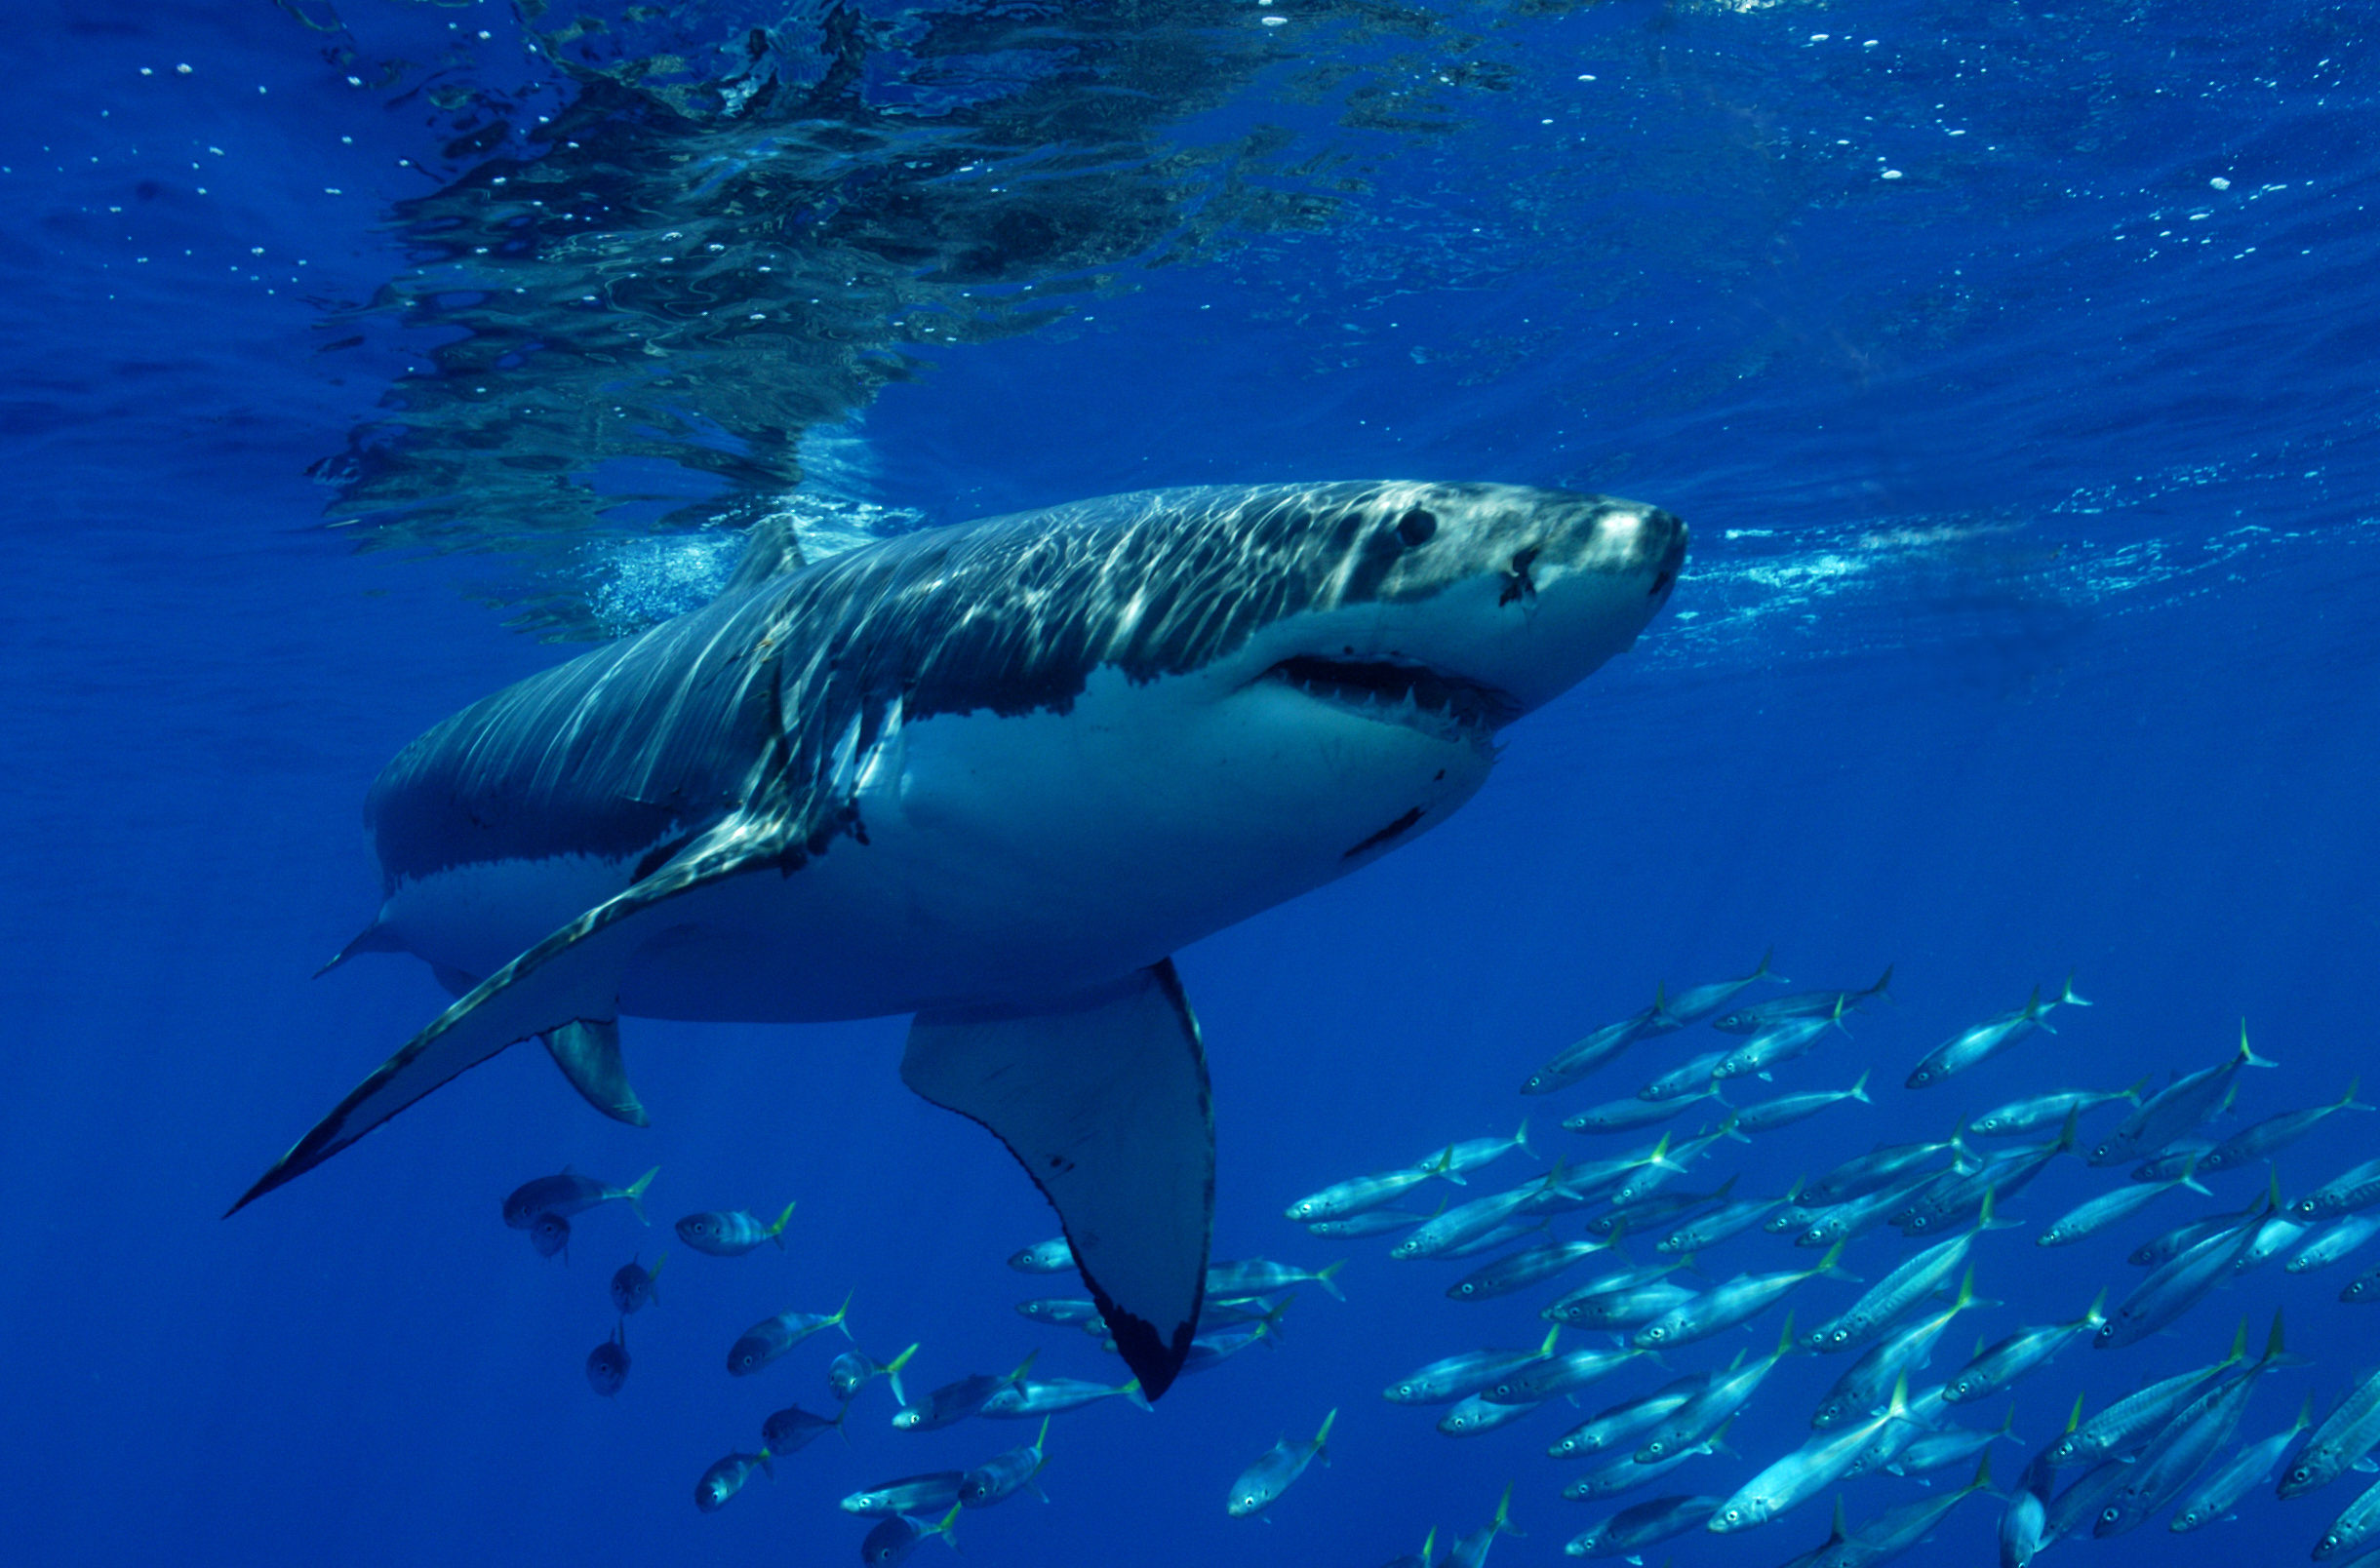 Great white shark in Western Australia swims in shallow waters close to popular beaches and surfing spots